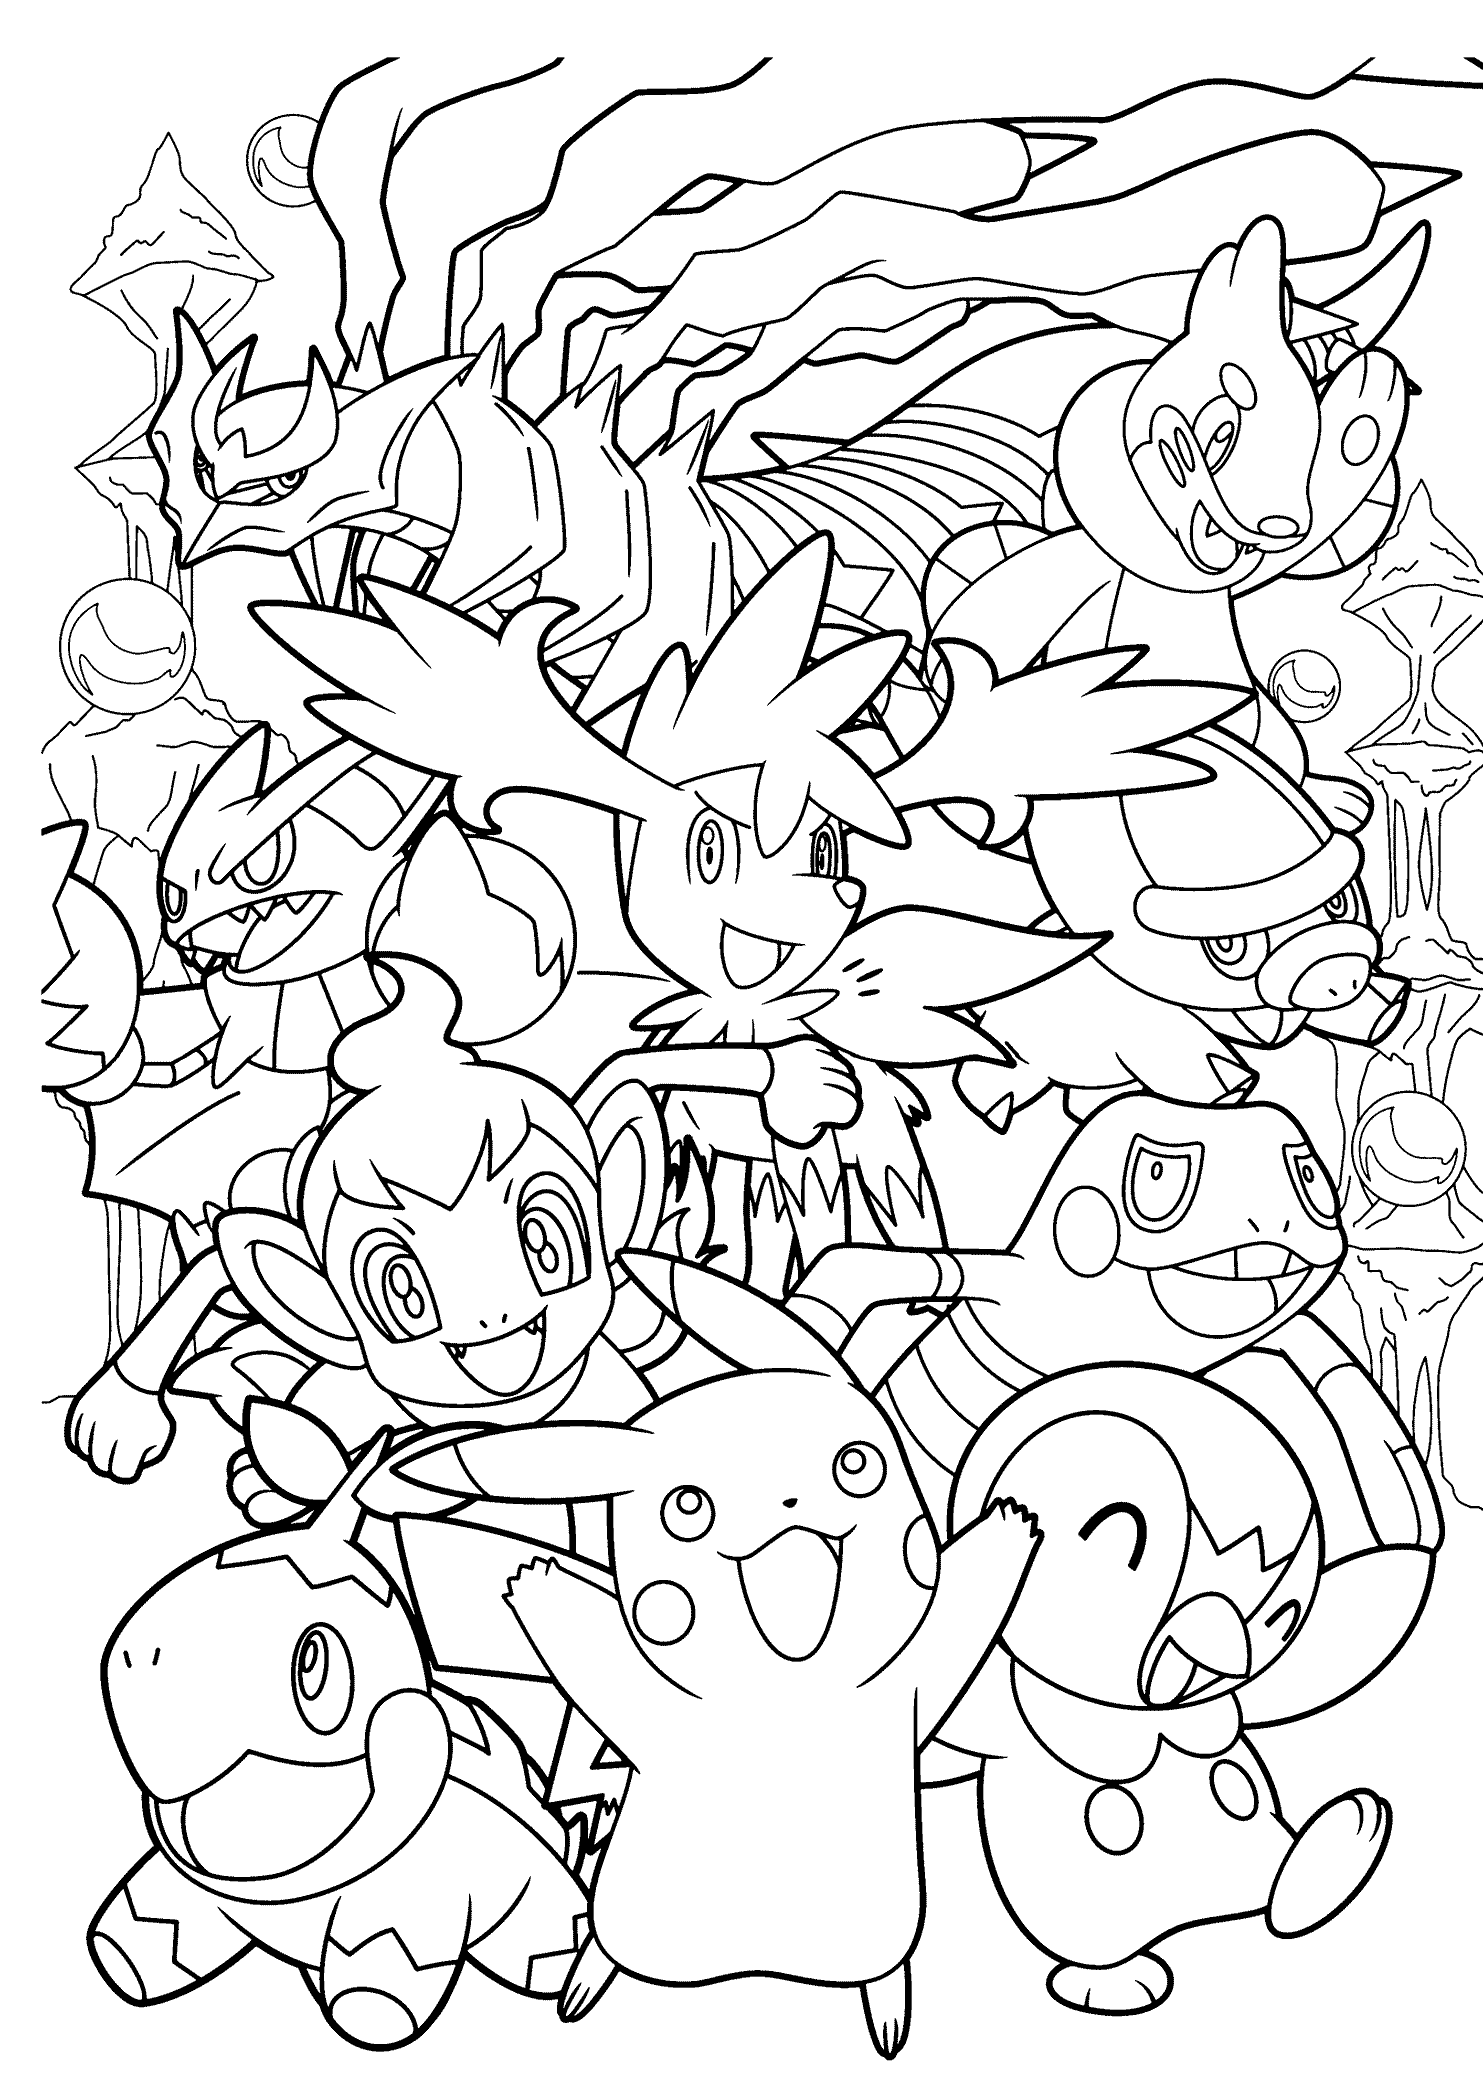 All Pokemon - Coloring Pages for Kids and for Adults